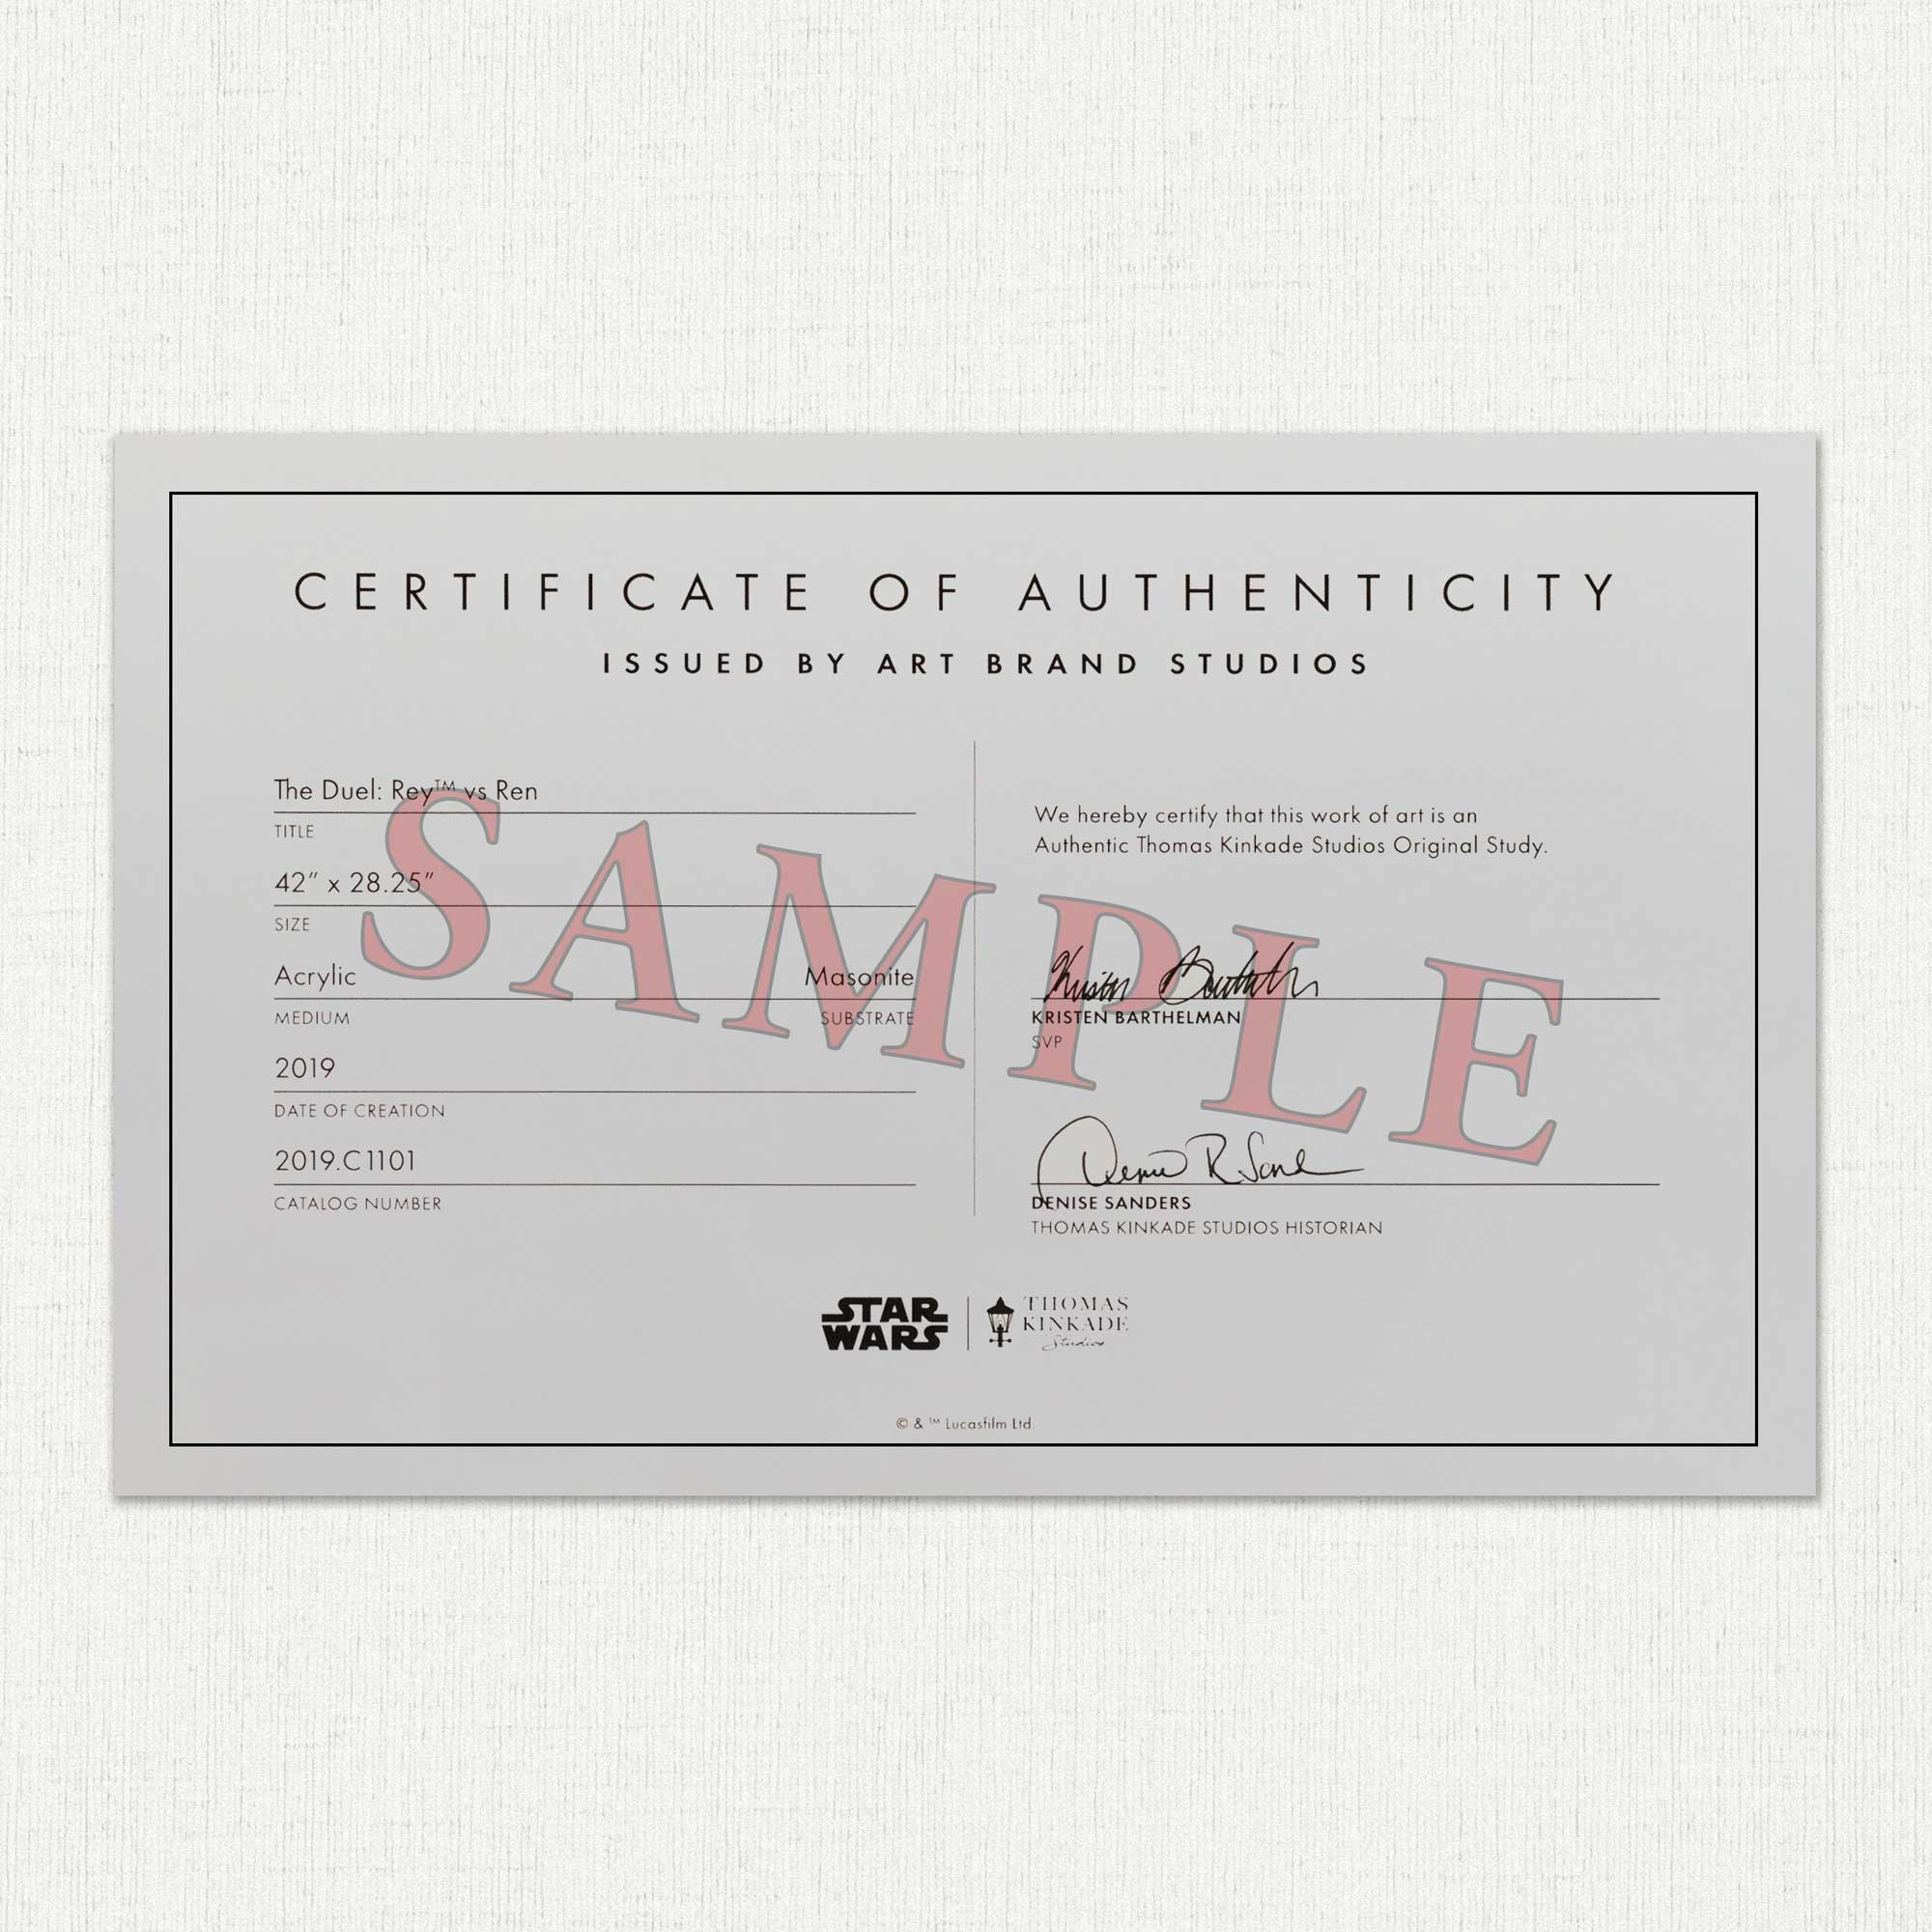 Certificate of Authenticity Sample